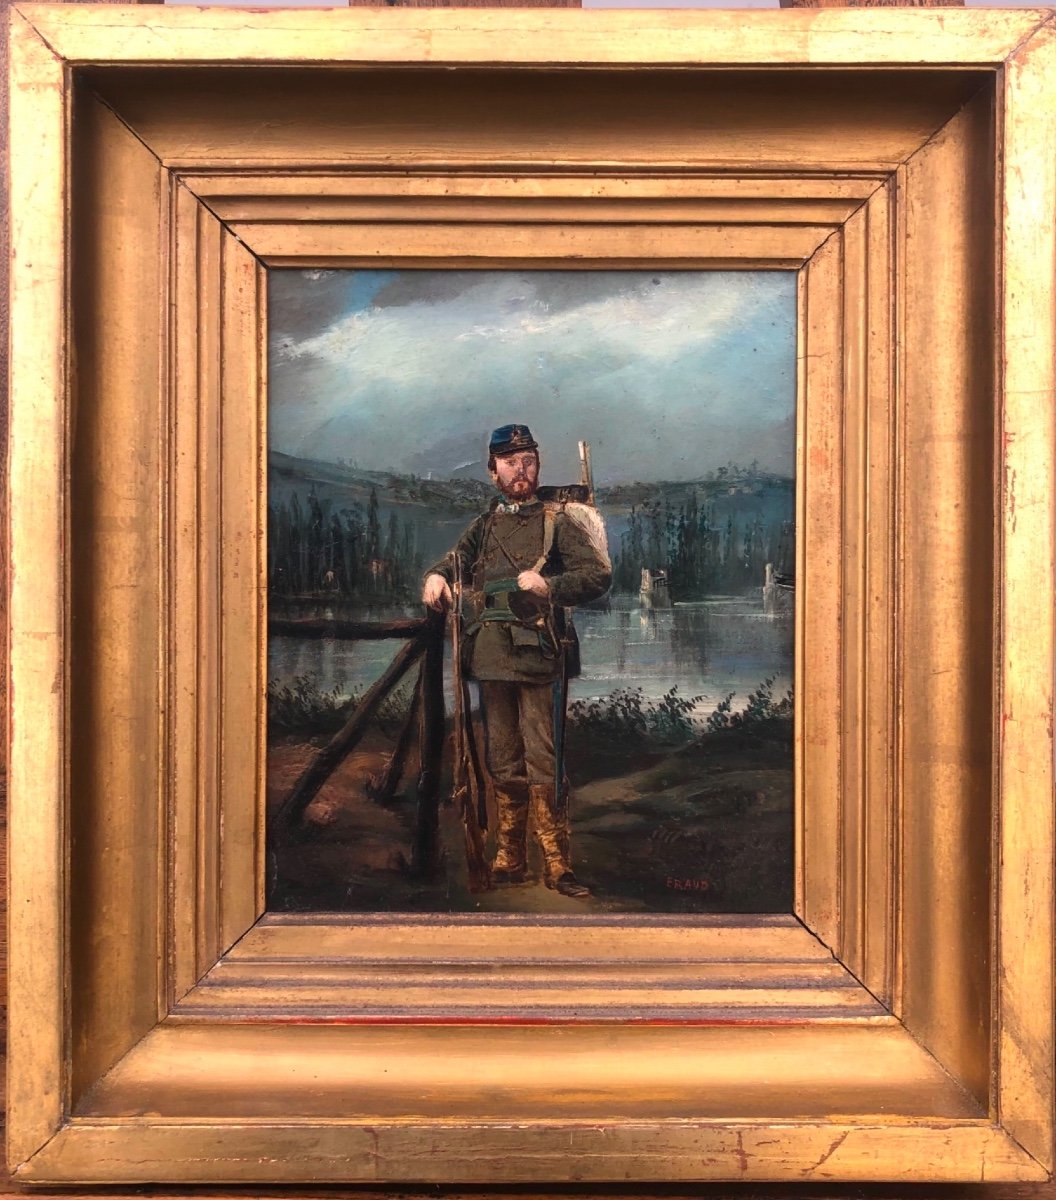 Oil Painting On Cardboard With The Figure Of A Soldier On A Rural Background. 